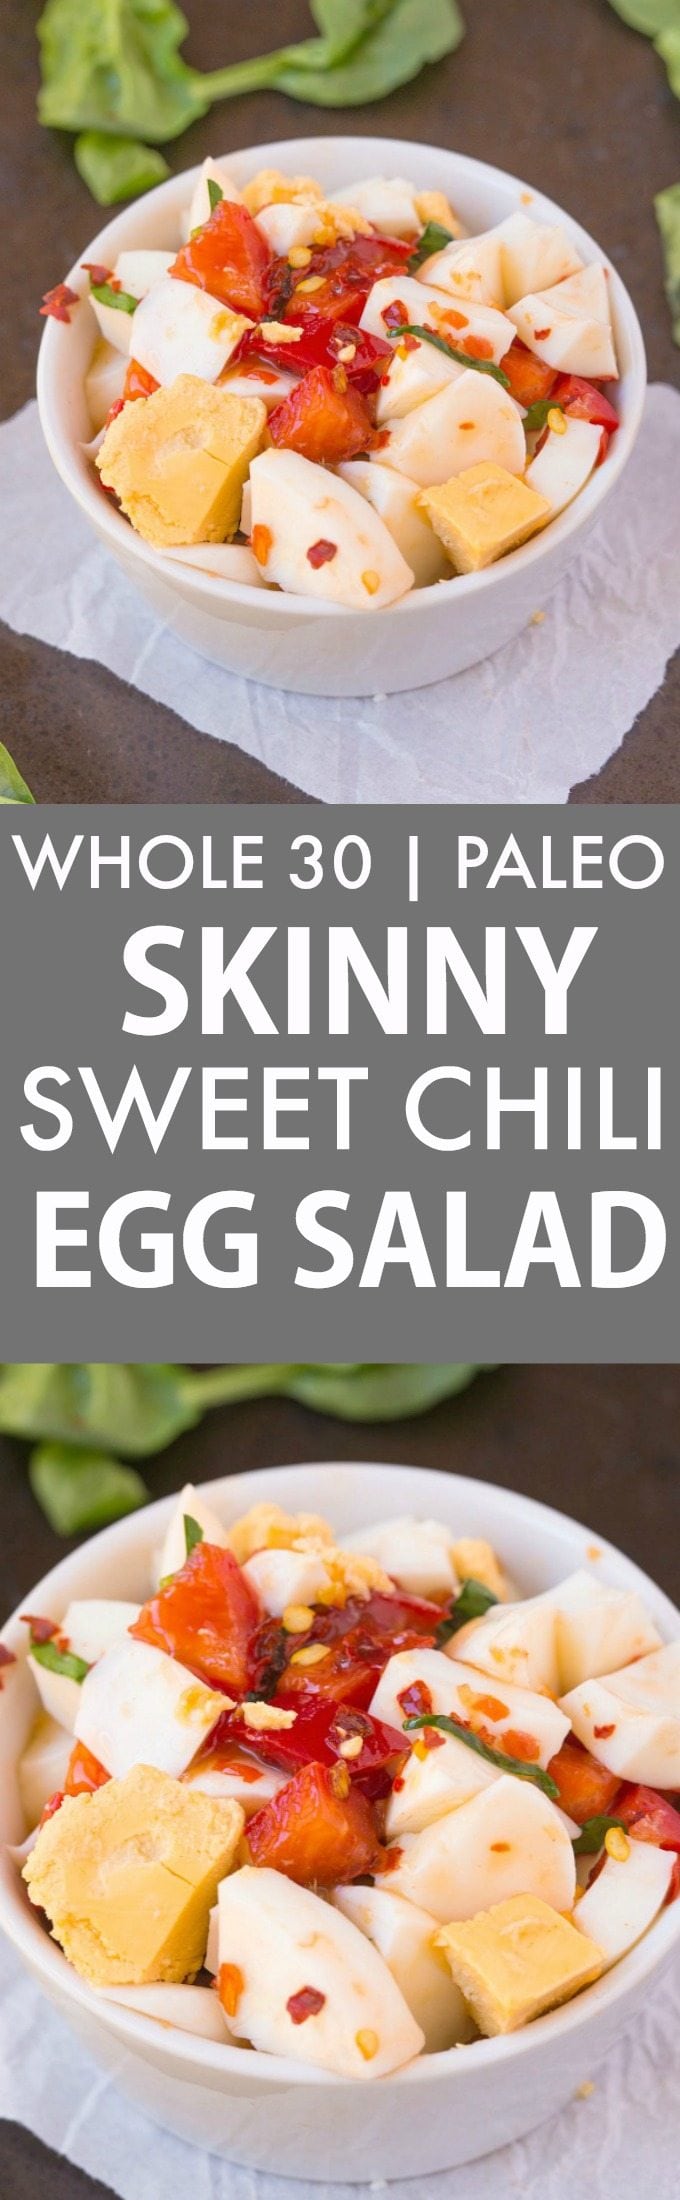 Whole 30 Skinny Sweet Chili Egg Salad (Whole30, Paleo, Gluten Free)- Quick, easy and delicious, this mouthwatering and simple egg salad is a huge hit- Low carb and low calorie! {paleo, gluten free, grain free, whole 30}- thebigmansworld.com